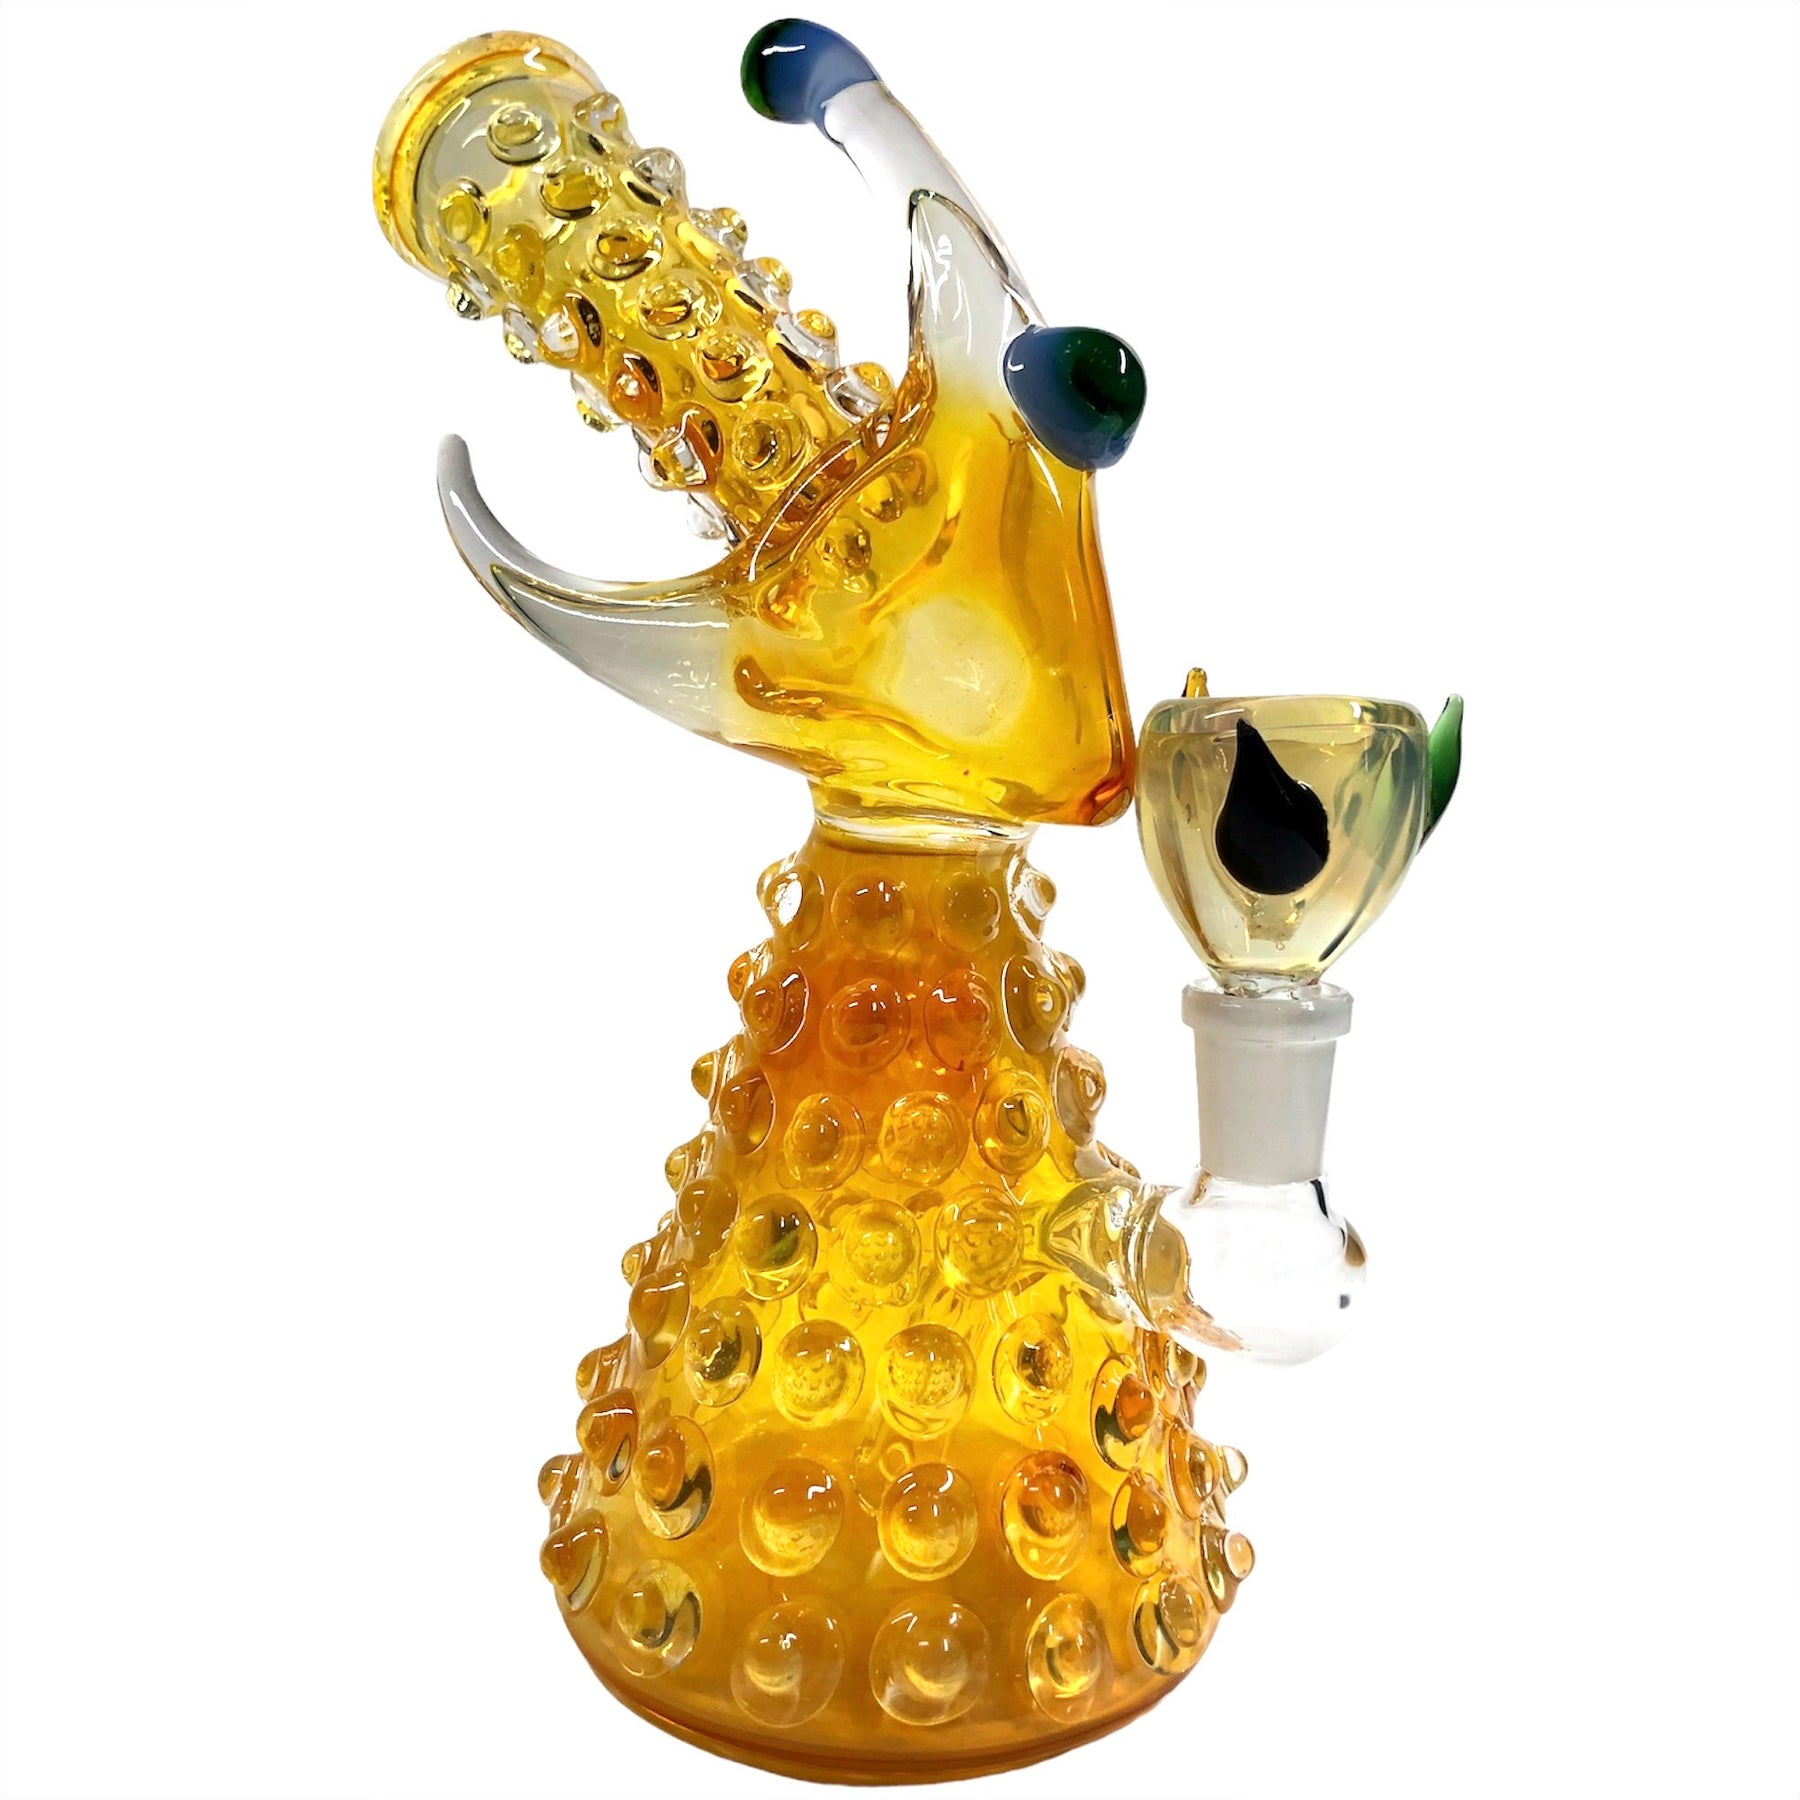 Yellow Fish Bong with Bubbles - Golden Leaf Shop